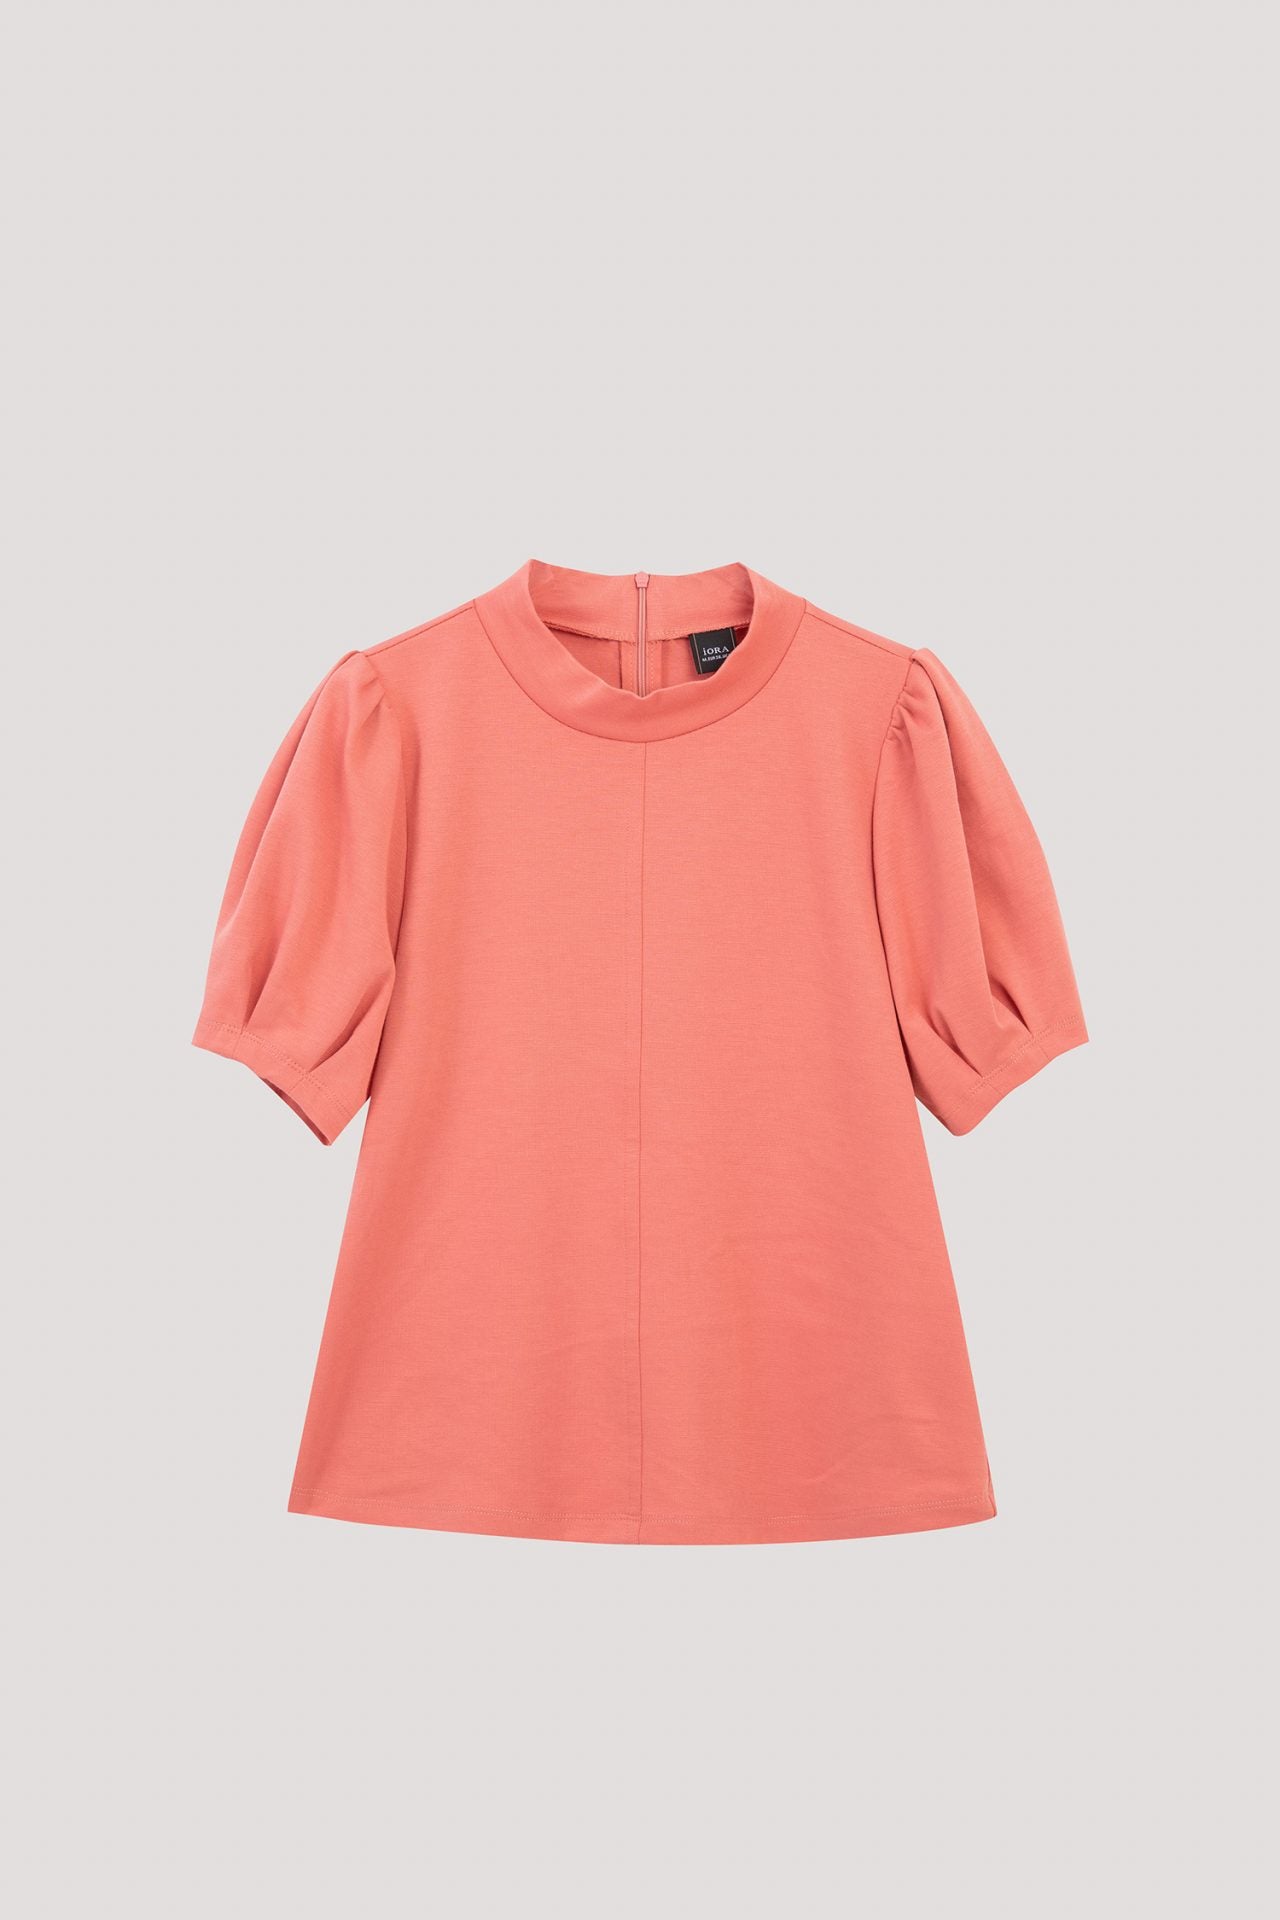 AT 10878 HIGH NECK TOP SALMON